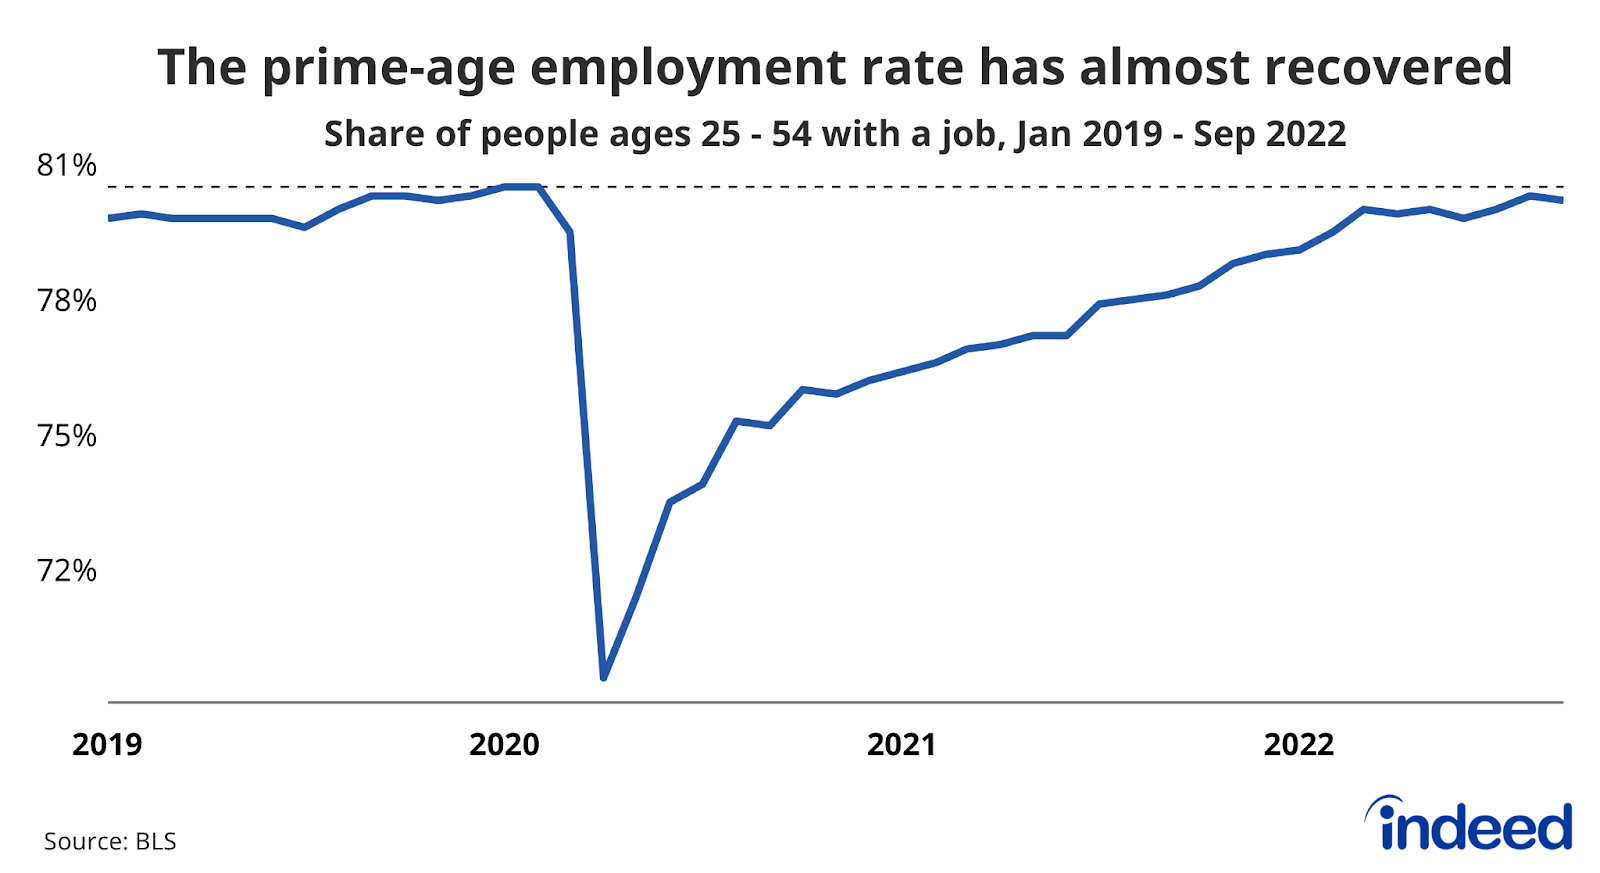 Line chart entitled “The prime-age employment rate has almost recovered” shows the share of people ages 25-54 with a job from January 2019 through September 2022.